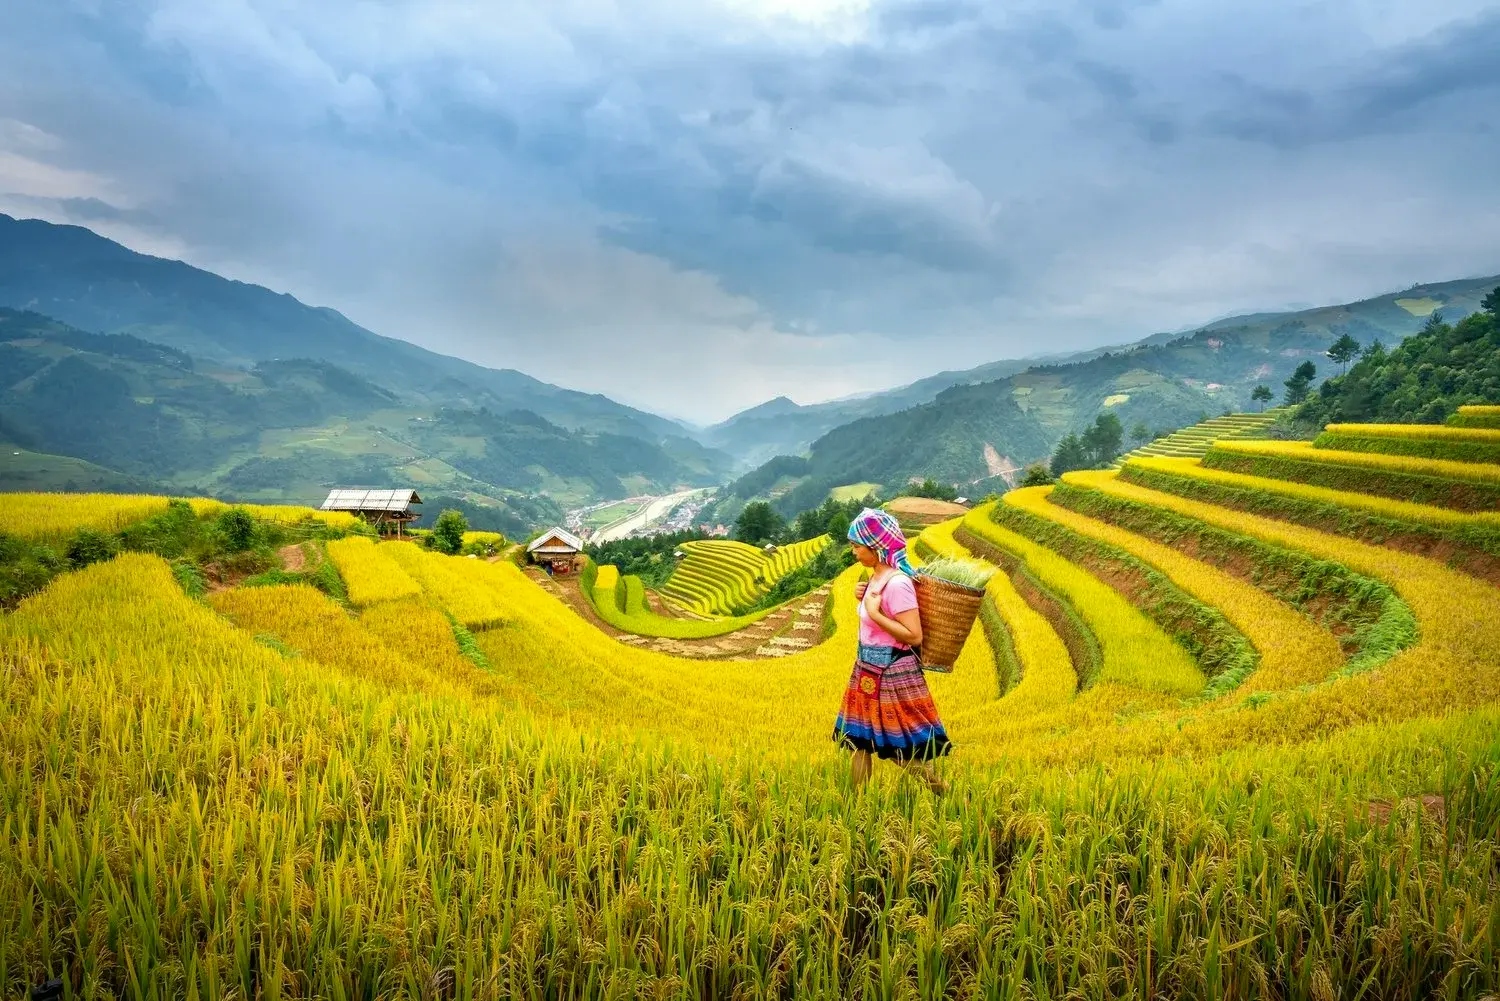 Main page image - woman on rice field